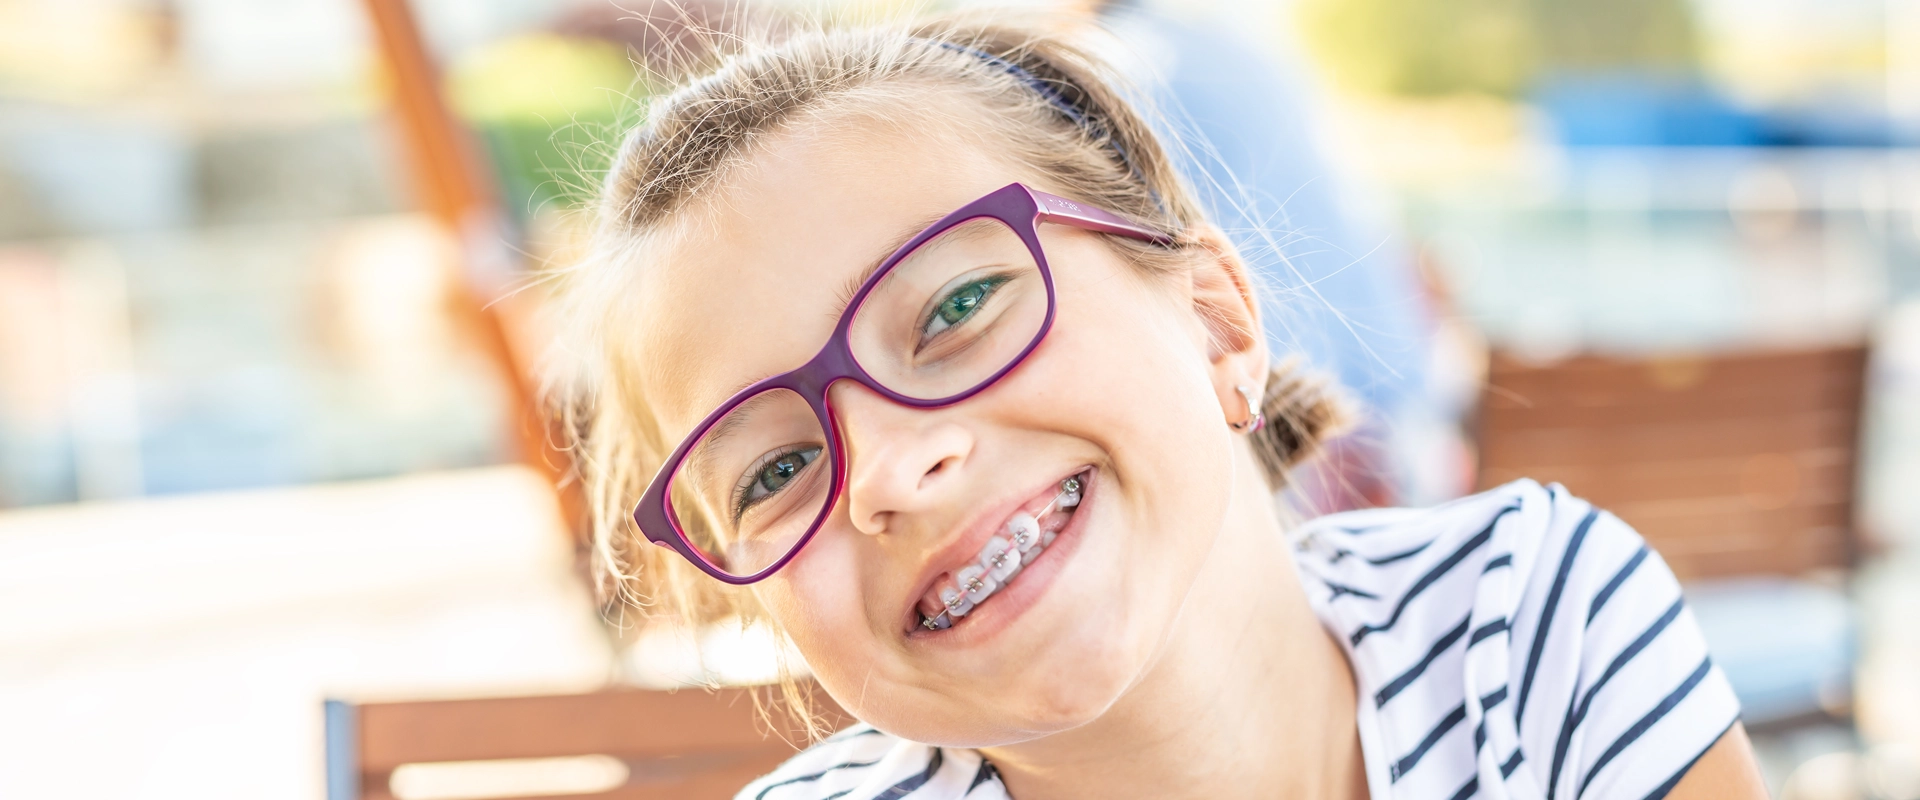 young girl with glasses and braces smiling